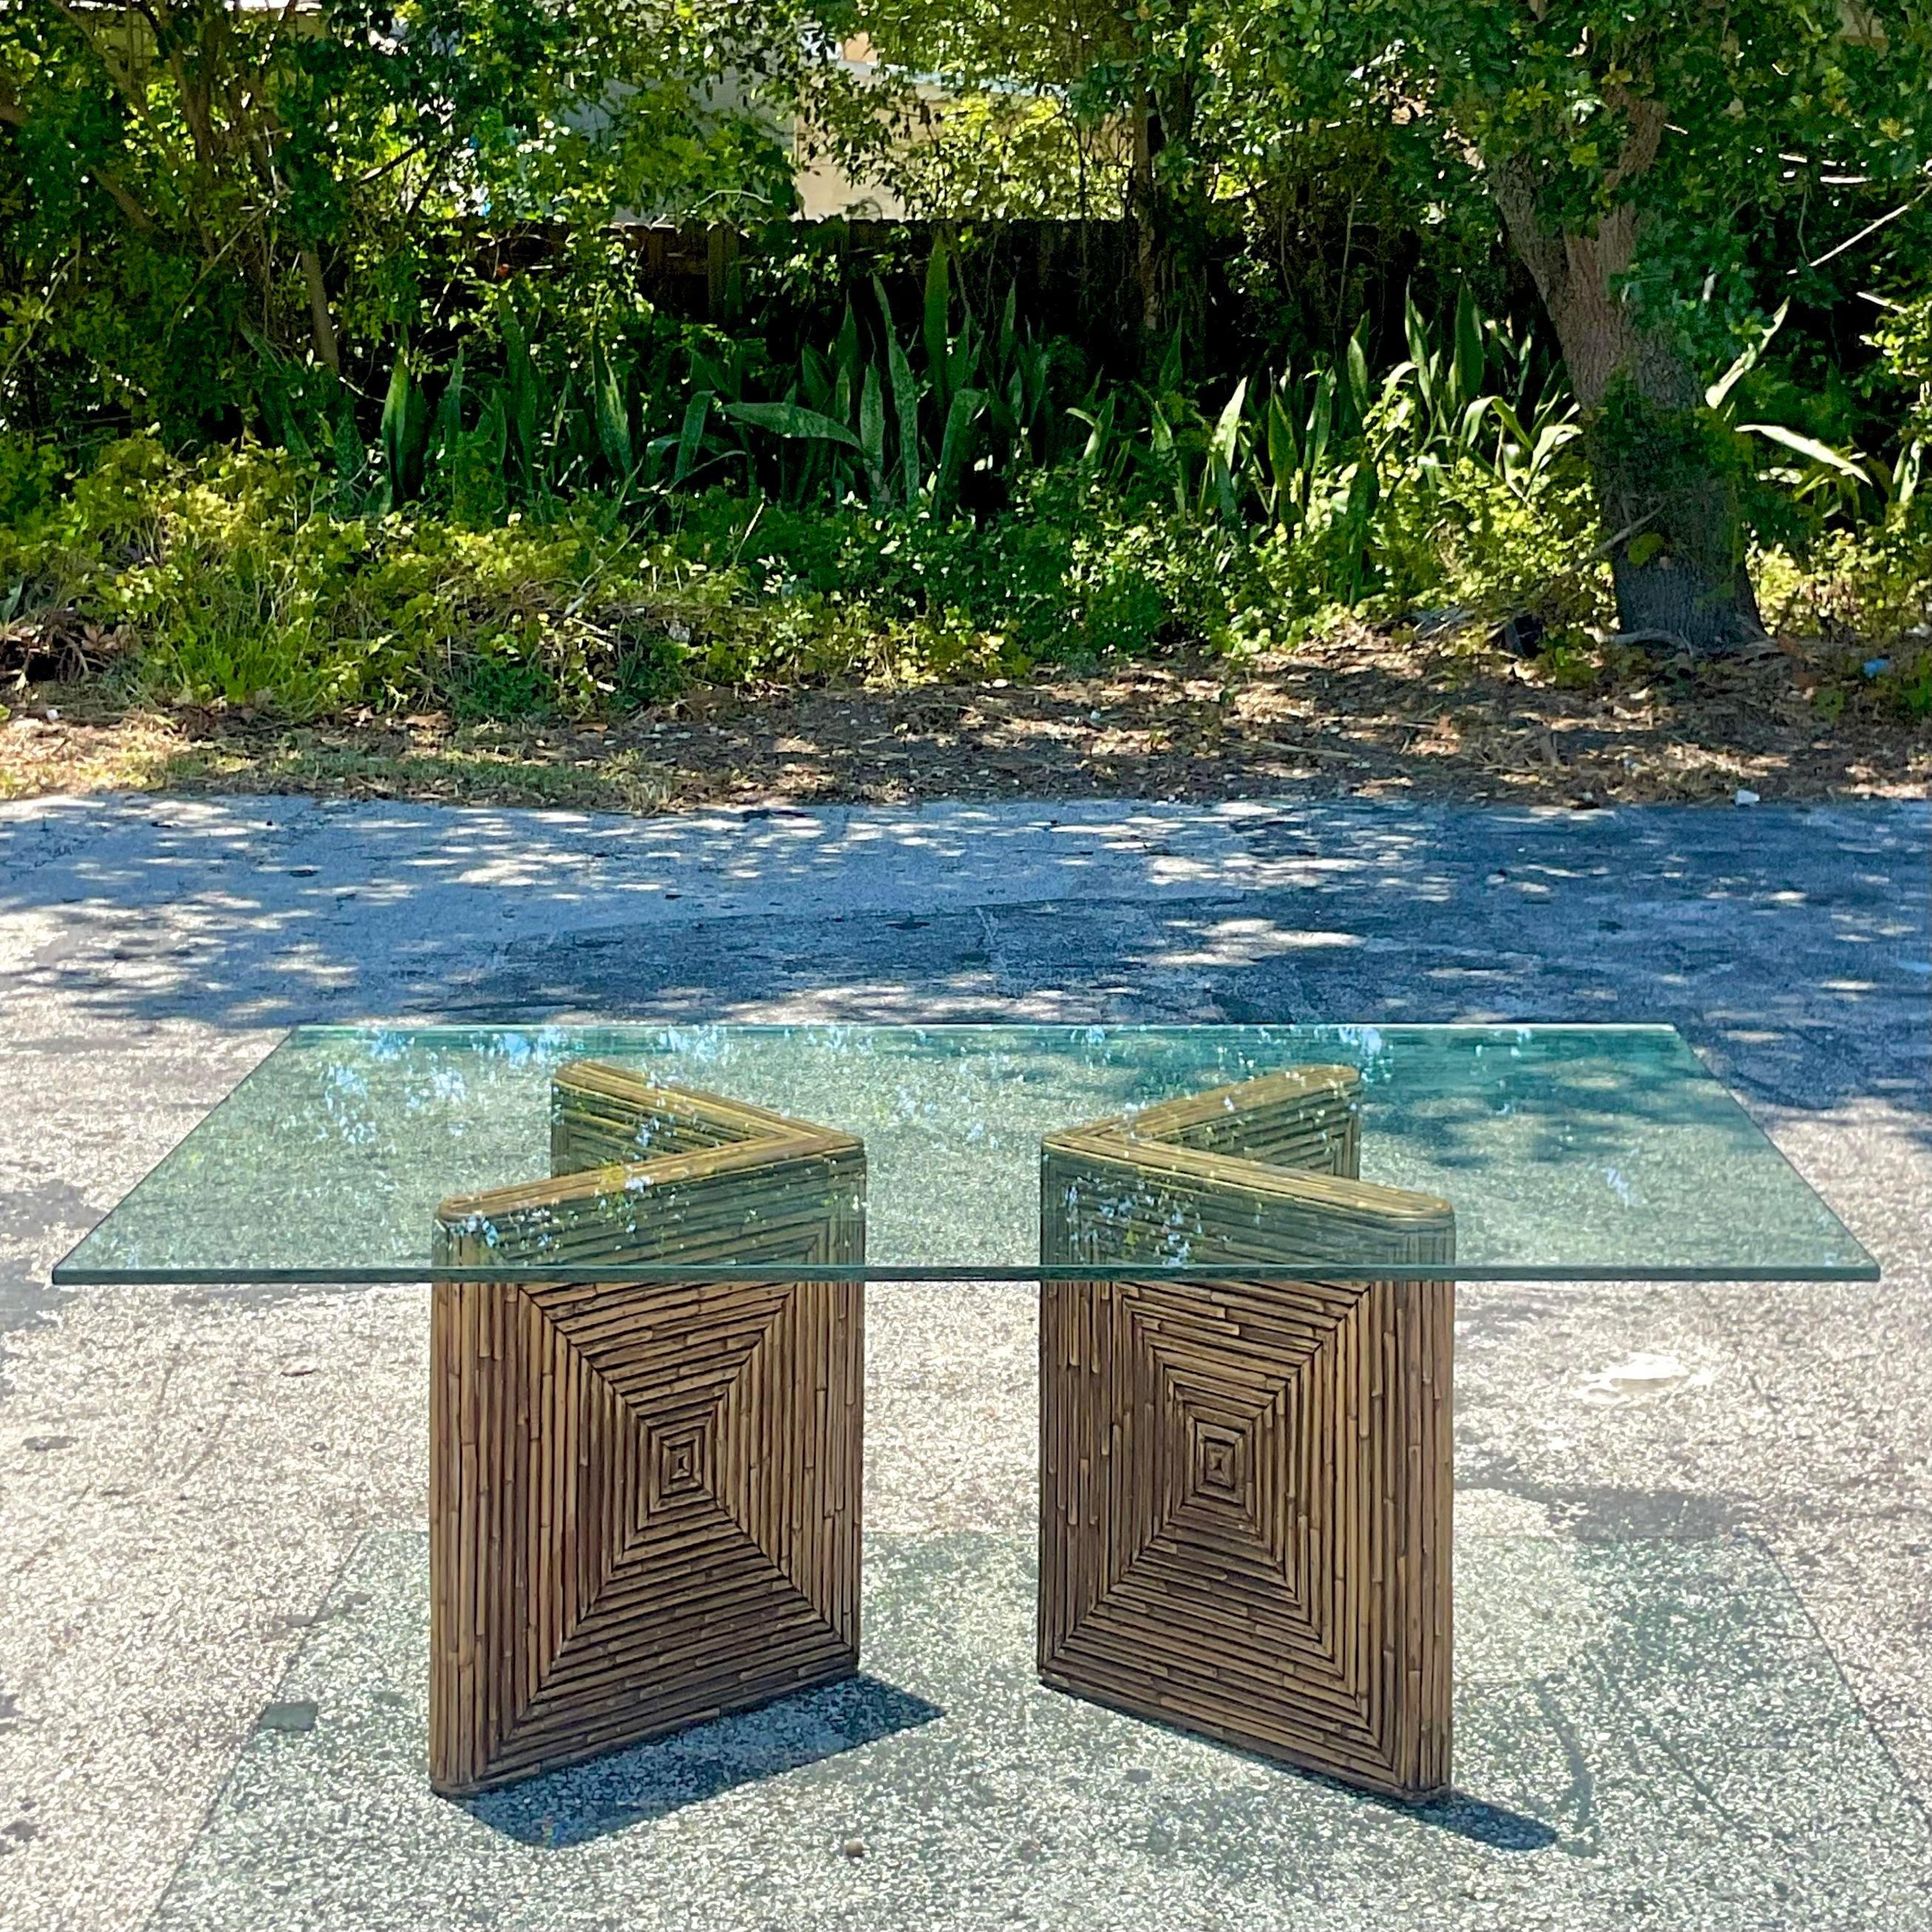 Bring the serene beauty of the coast into your home with our Vintage Coastal Pencil Reed Coffee Table Pedestals. Crafted with natural materials and inspired by American coastal living, this set of two pedestals adds a touch of relaxed elegance and